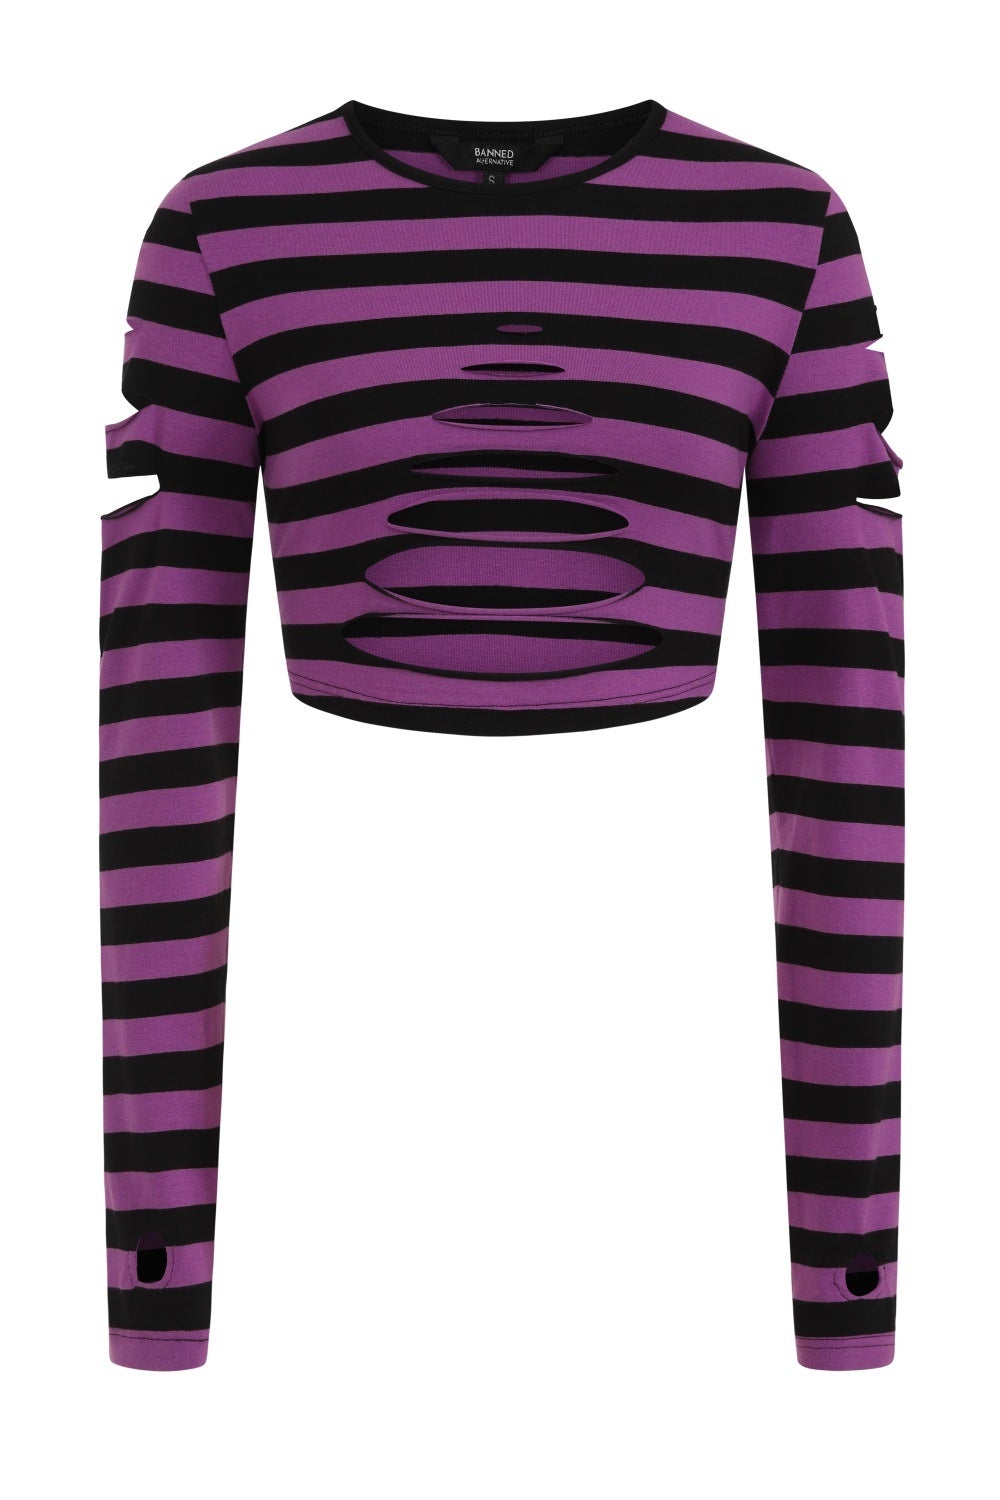 Ghost image of purple and black stripped cropped top with ripped details